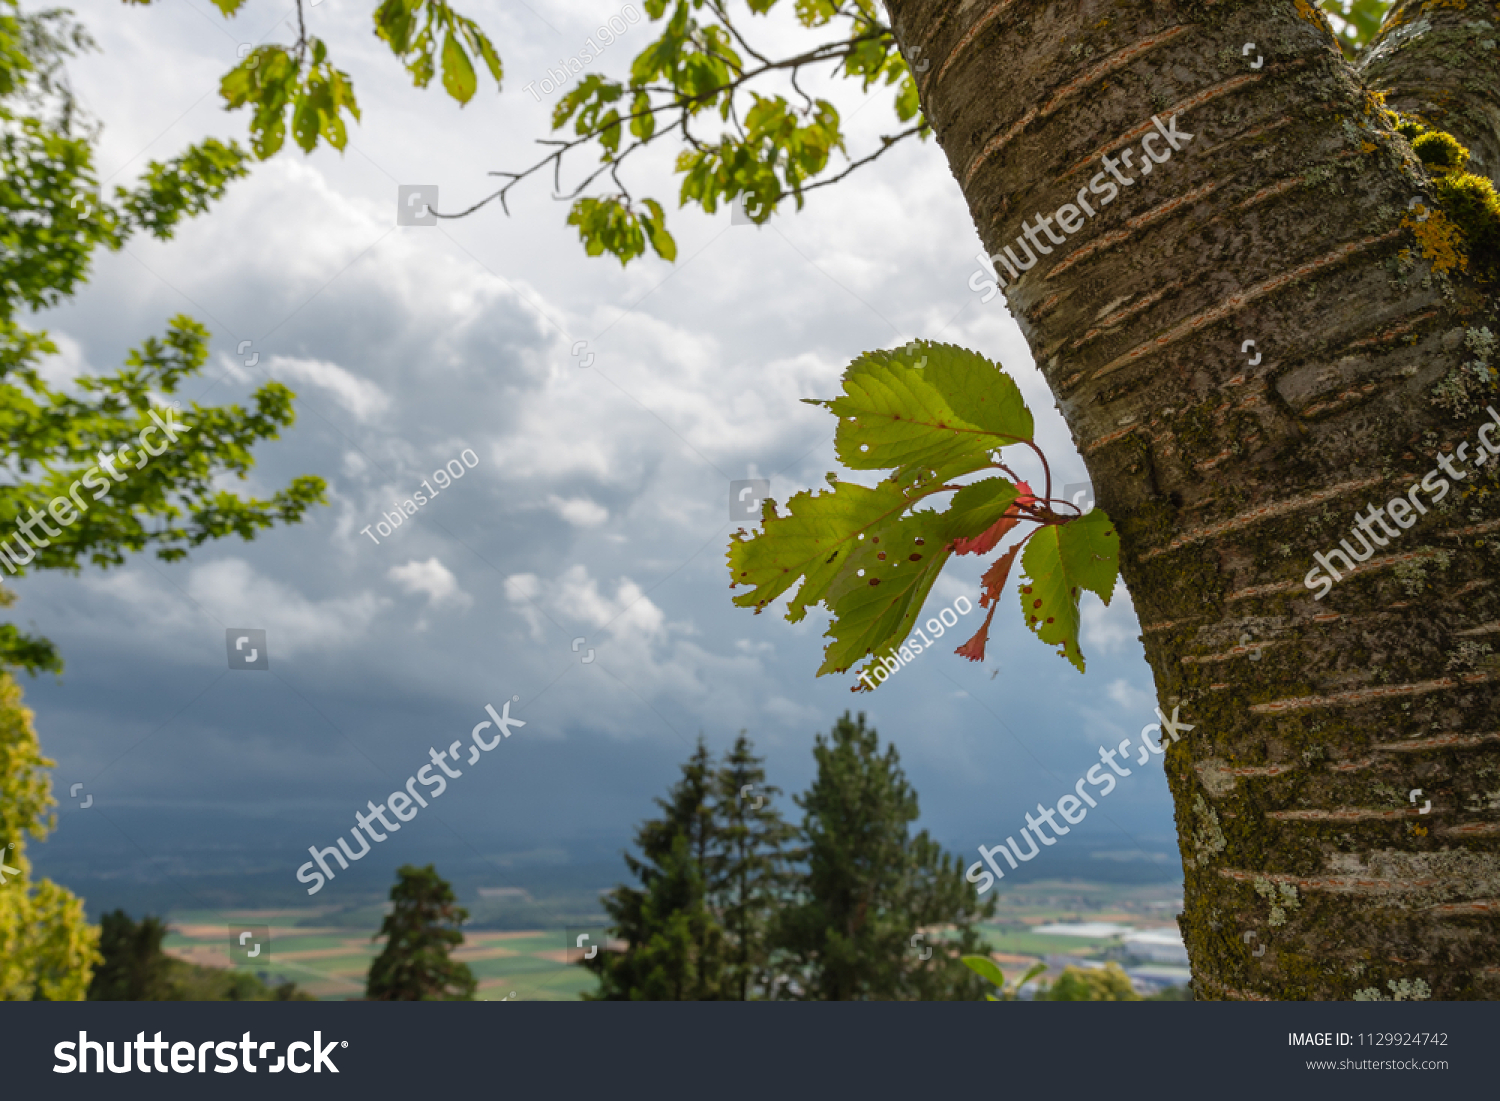 Tree trunk with green leaves and cloudy landscape in background #1129924742